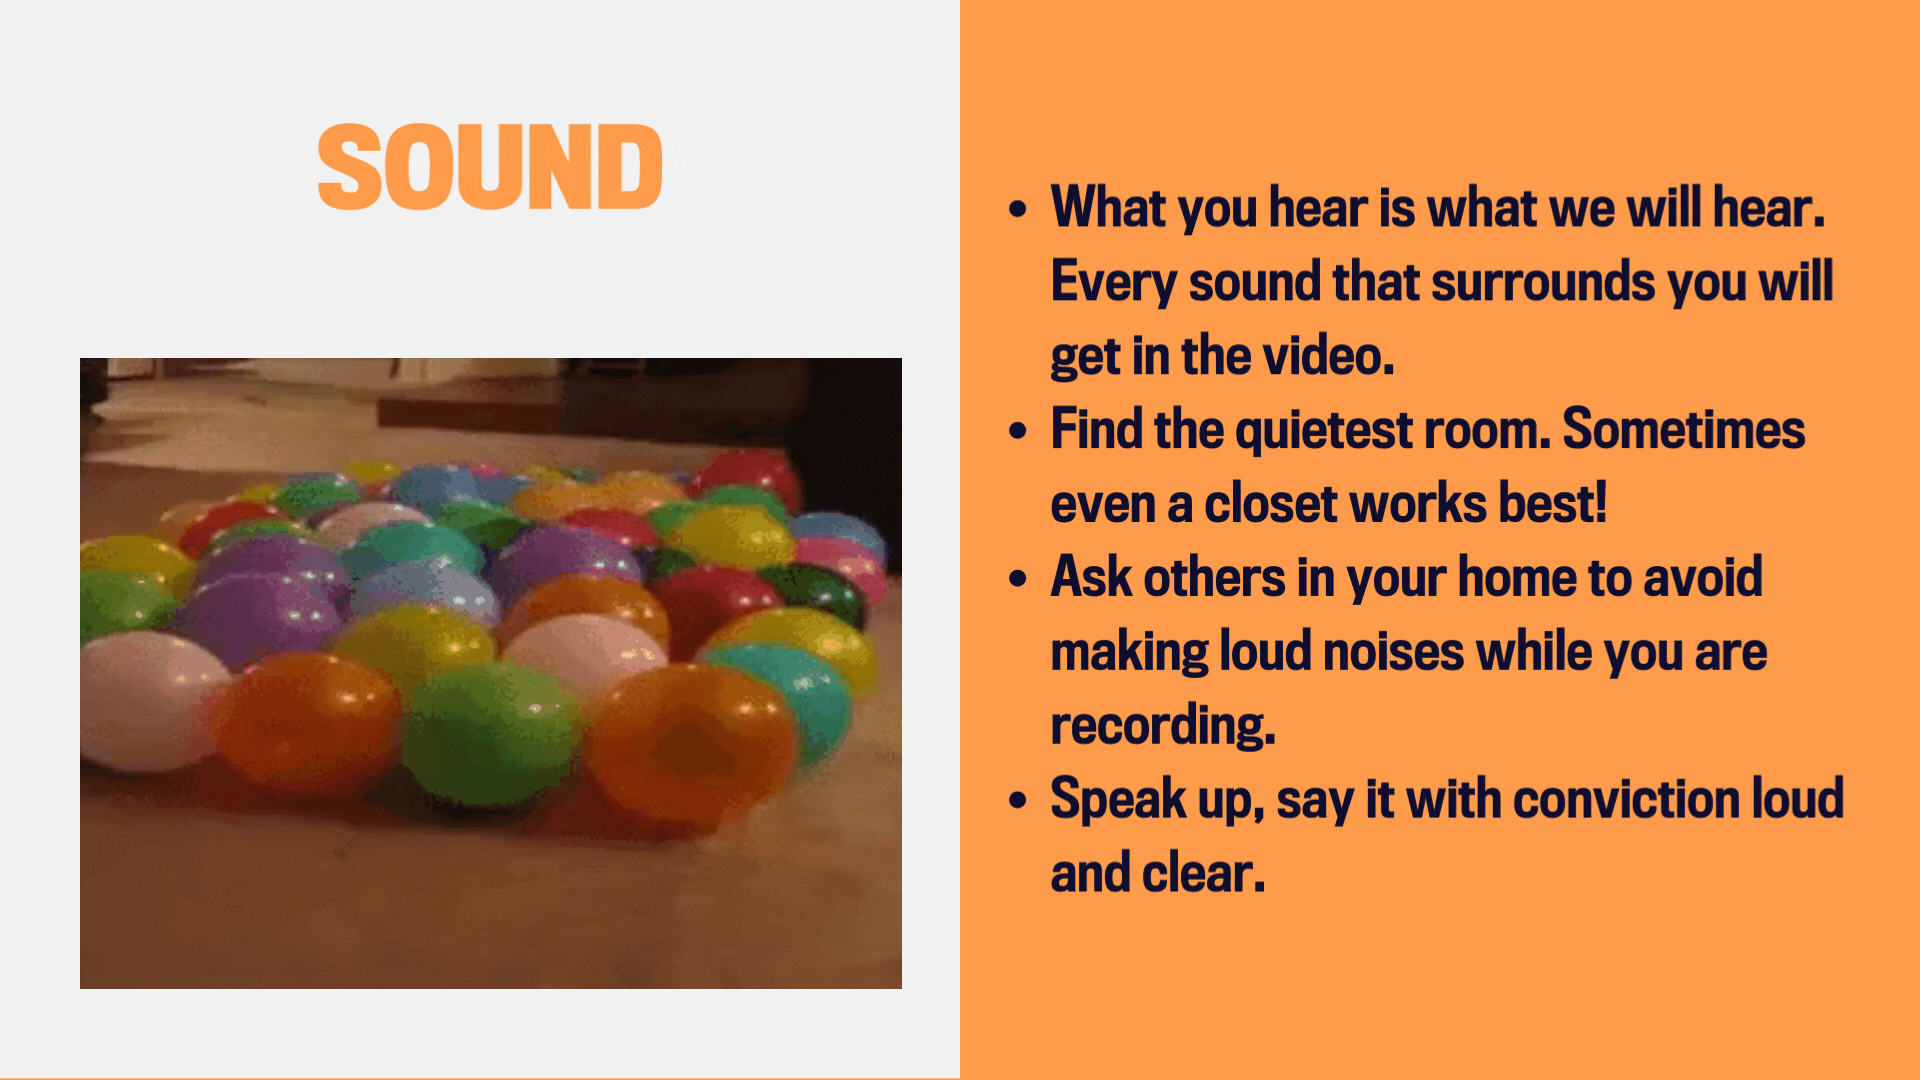 Make sure there is no background noise. What you hear is what we hear.